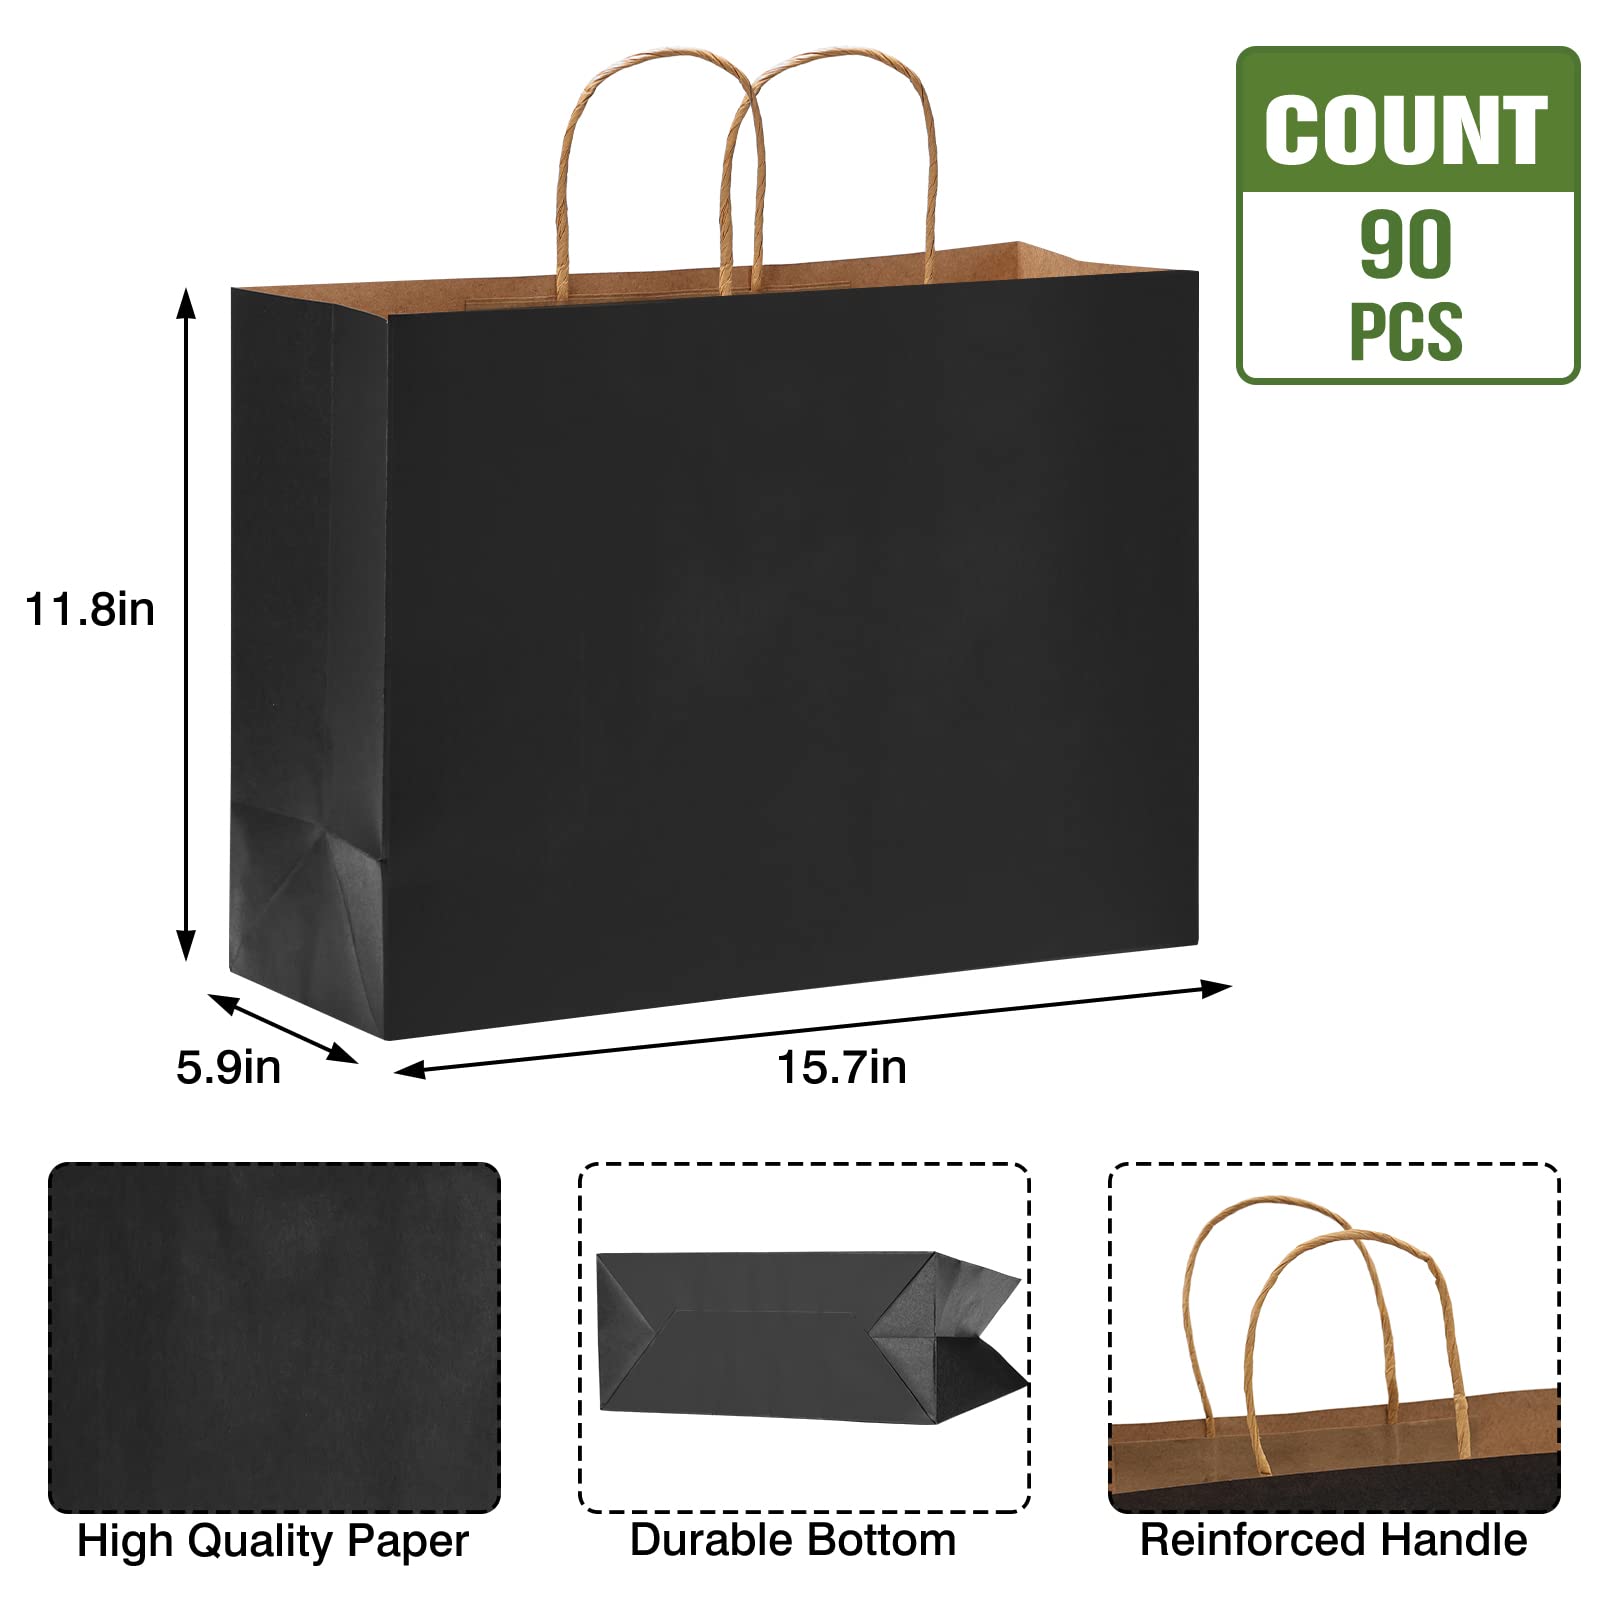 Moretoes 16x6x12 Inch 90pcs Paper Gift Bags Black Kraft Paper Bags with Handles, Large Gift Bags Shopping Bags in Bulk for Boutiques, Grocery, Mechandise, Party, Gifts & Merchandise